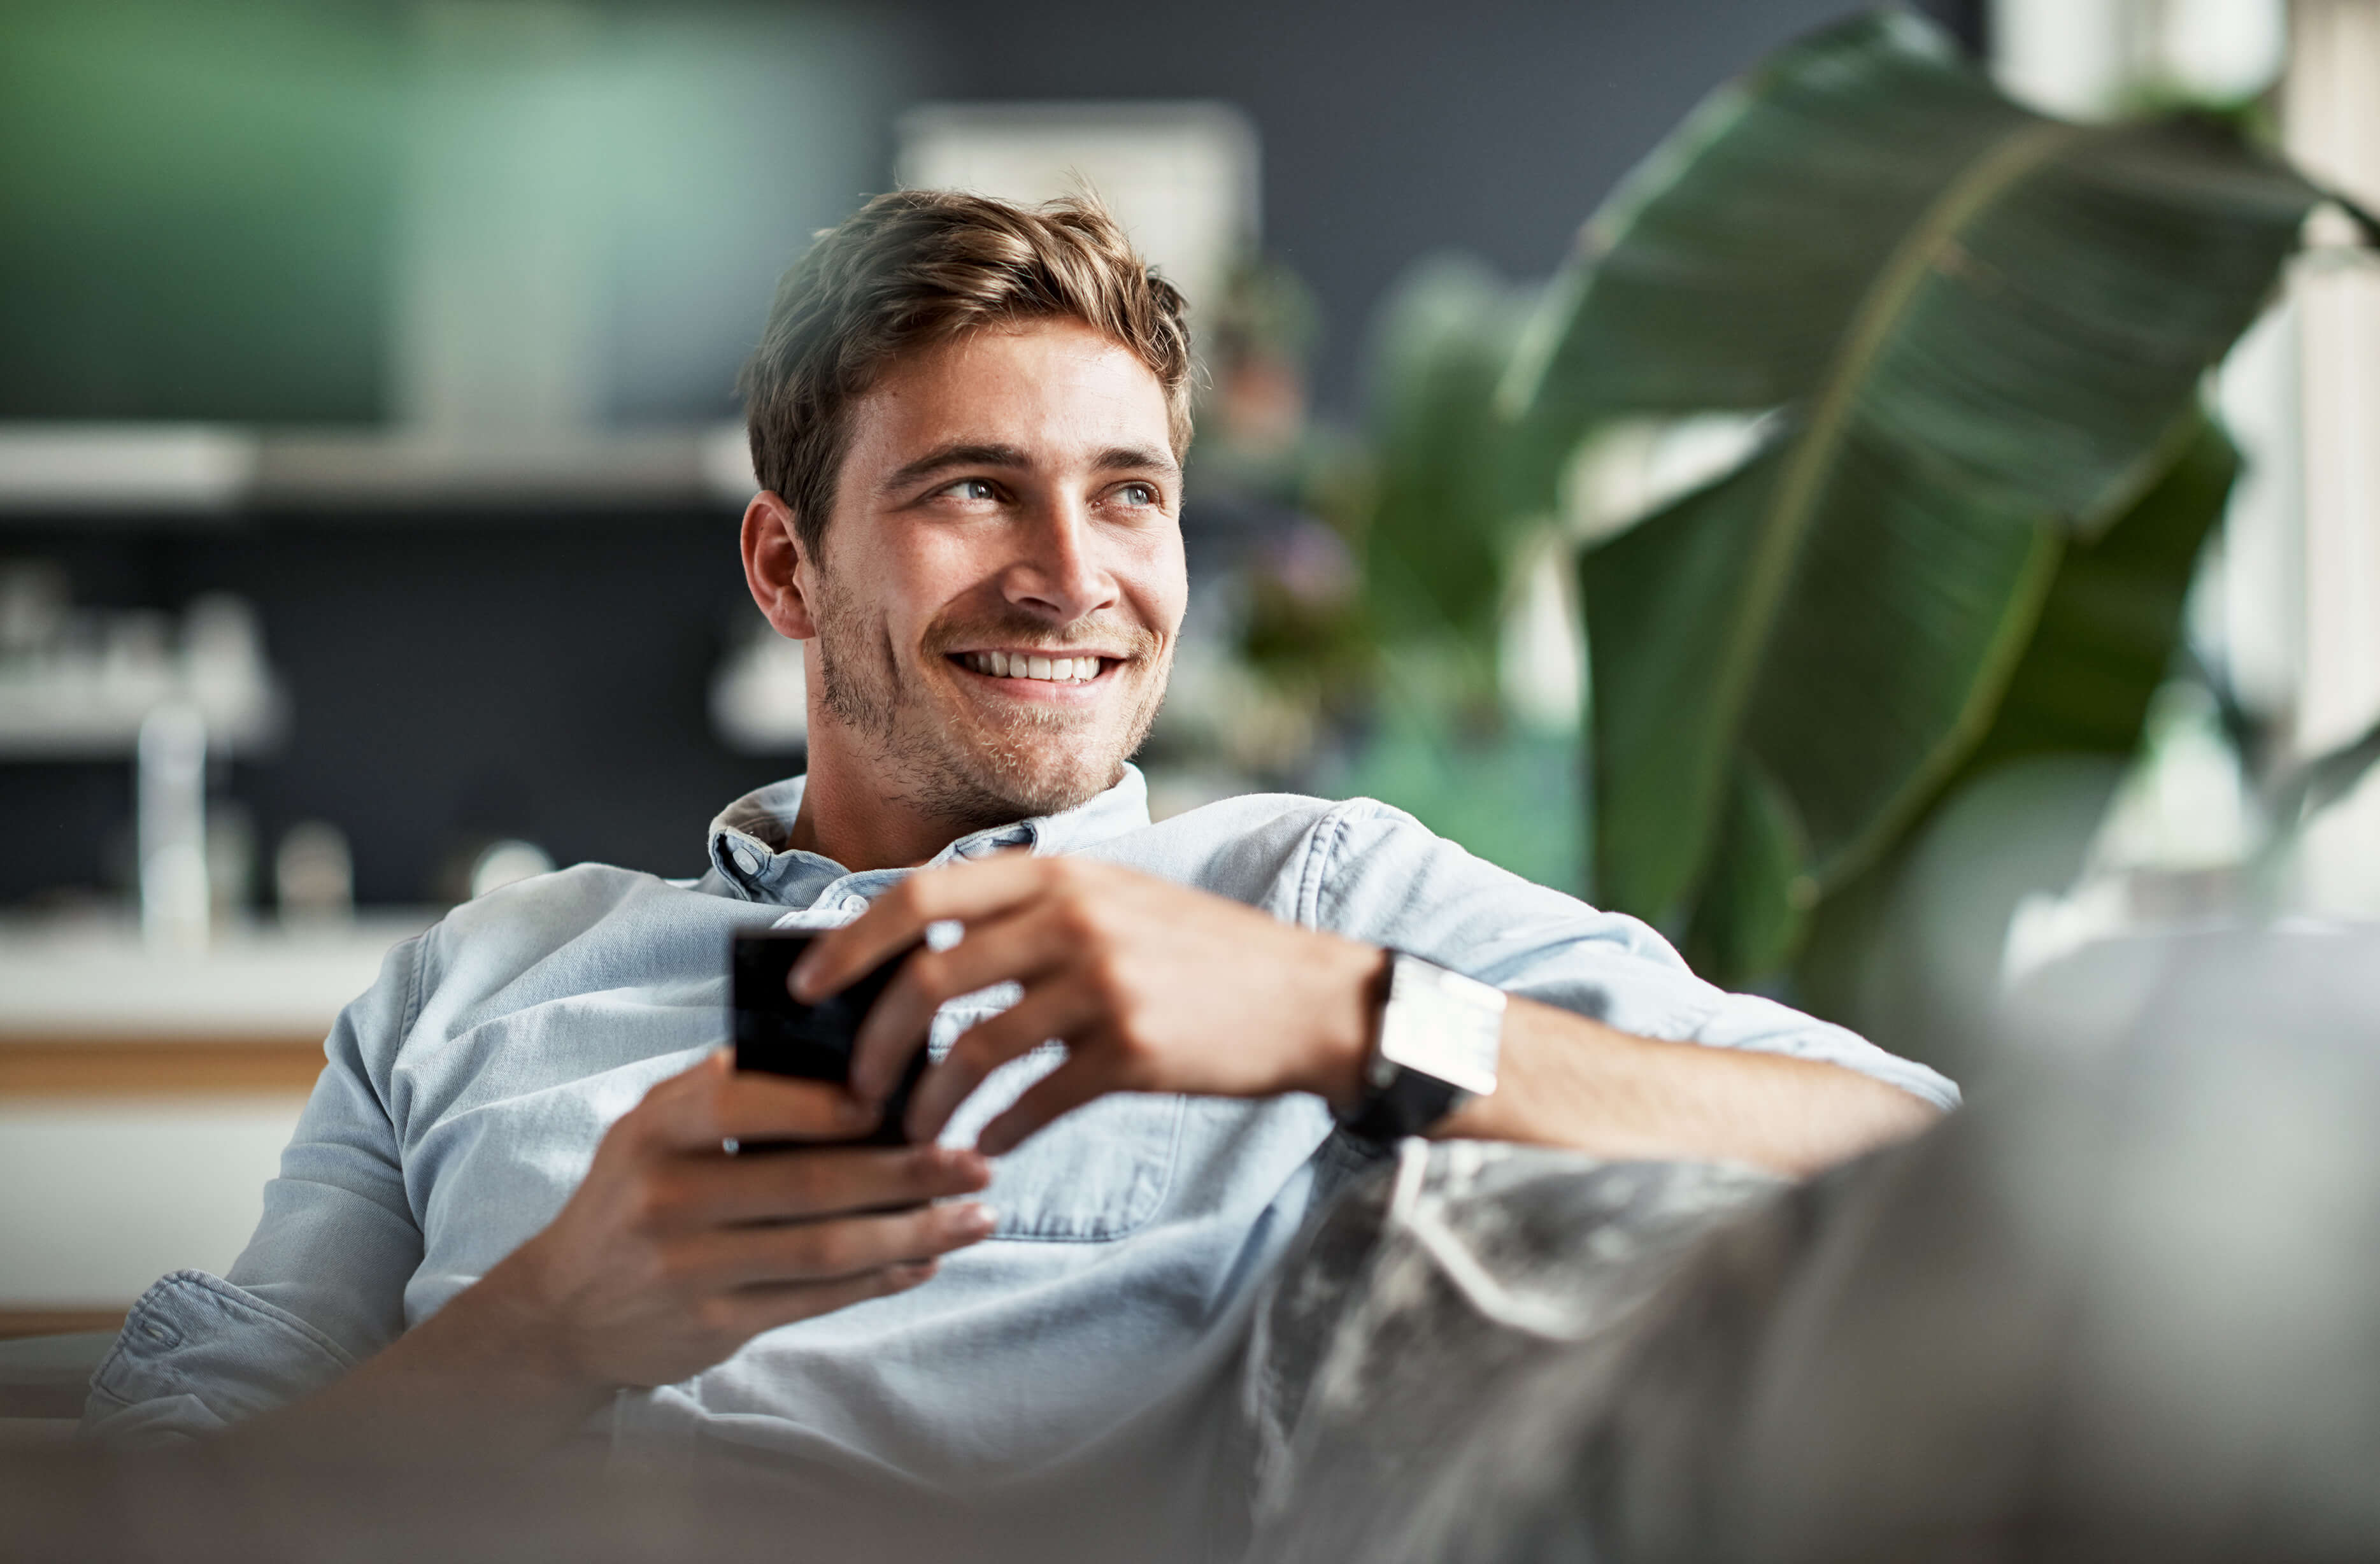 Man on sofa holding his phone and smiling